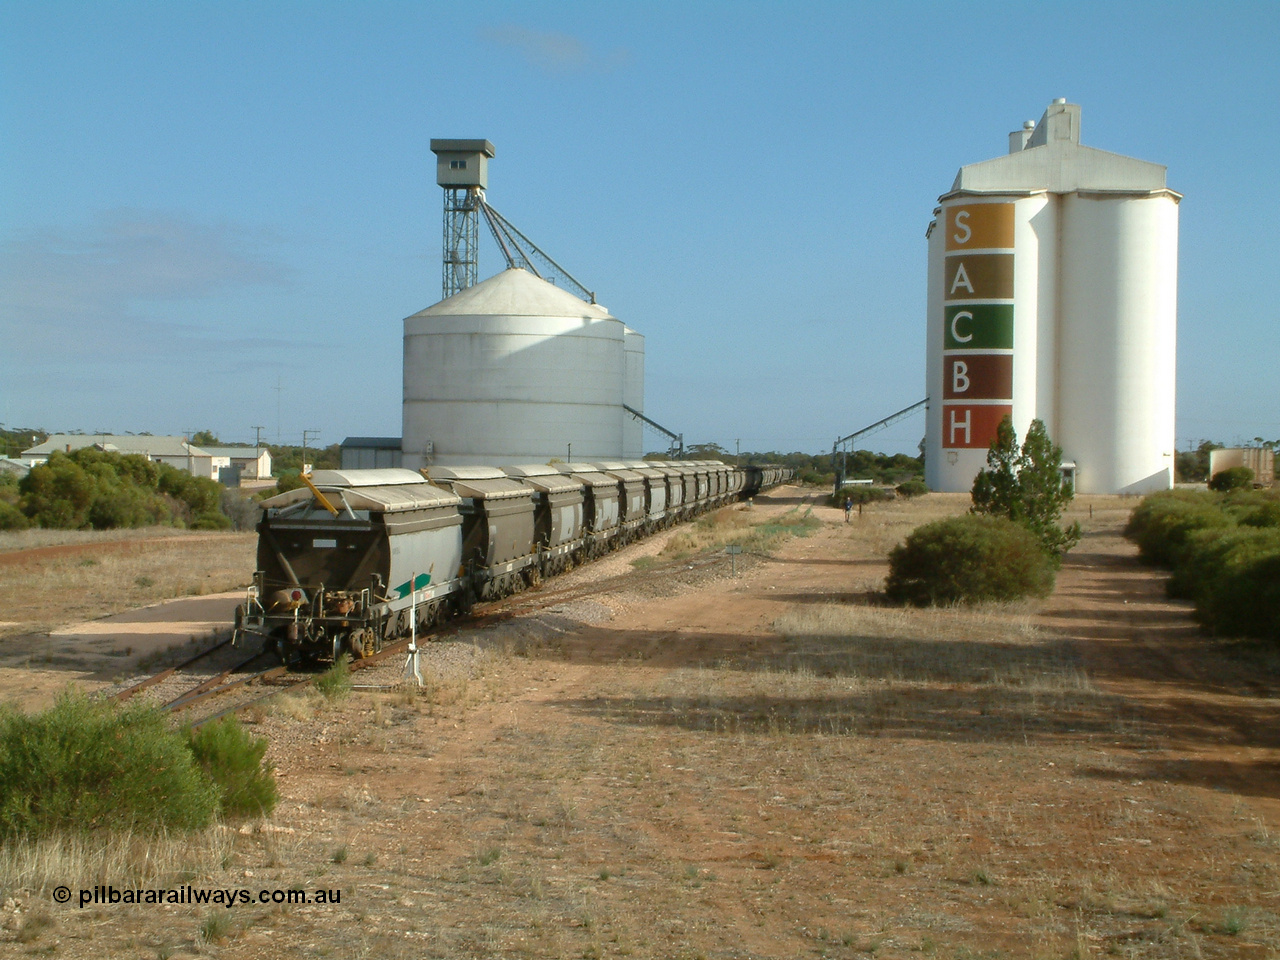 030409 084719
Kyancutta, XNW type bogie grain hopper waggon XNW 12 on the rear of a string of twelve such waggons, Comeng Qld built XNG type bogie waggon for Norseman Goldmines NL, then WAGR owned and coded XNA then in 1994 converted to XNW grain waggons. They arrived on the Eyre Peninsula system from 2001.
Keywords: XNW-type;XNW12;Comeng-Qld;XNG-type;XNA-type;